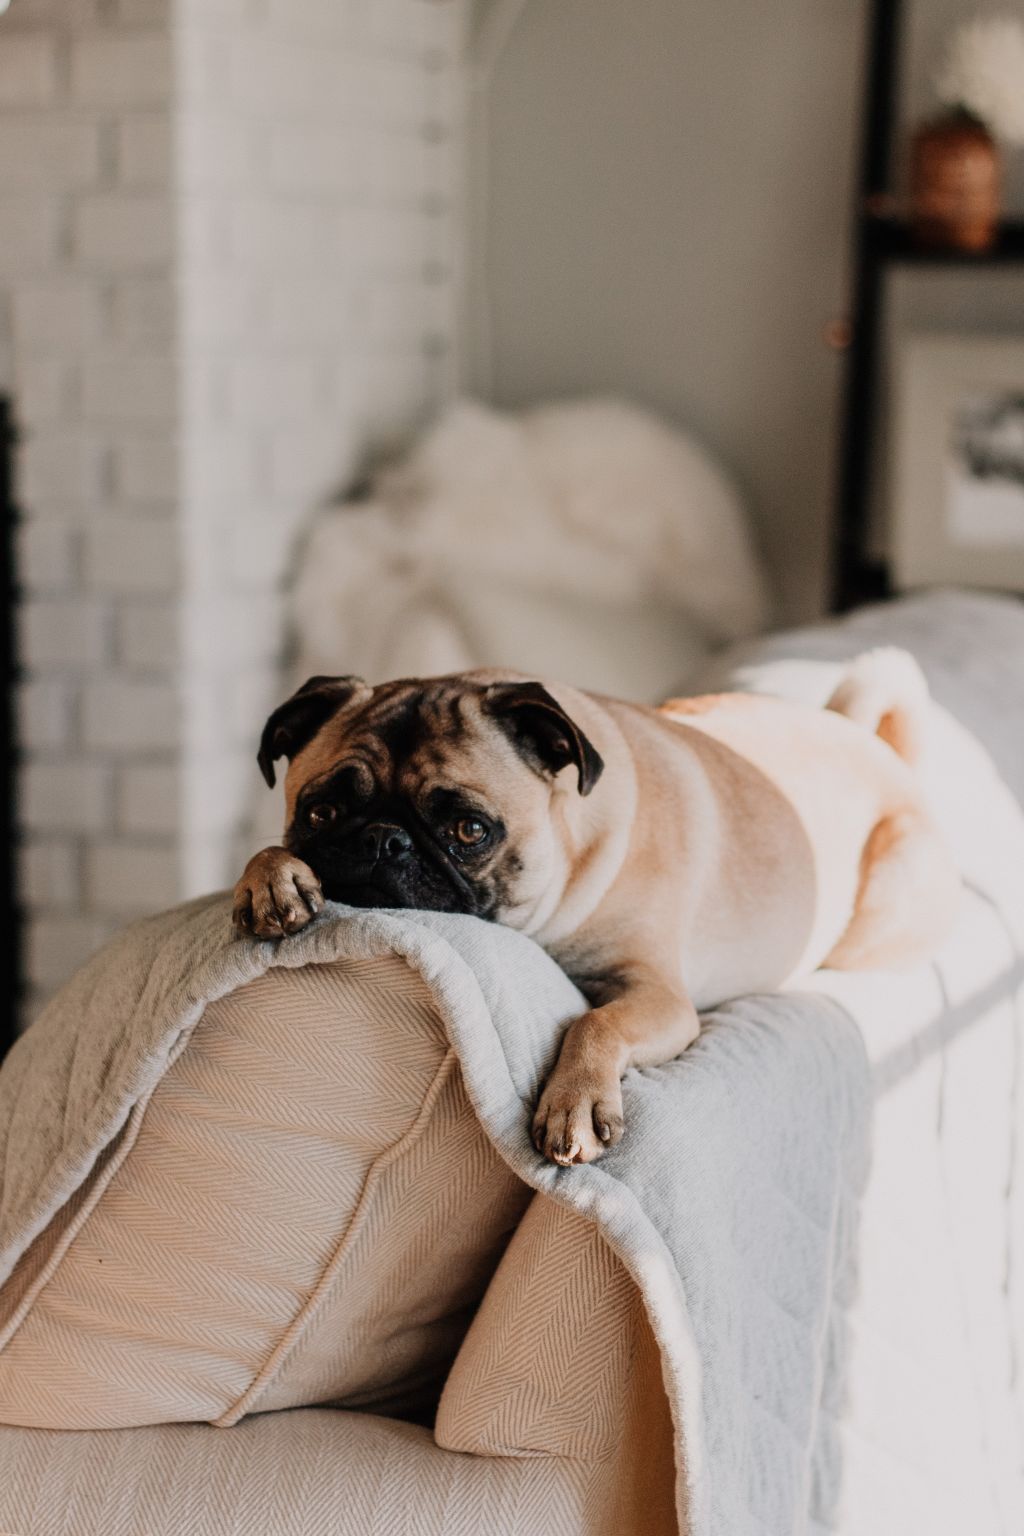 People often remark how comfortable Daisy looks in 'her' new home. Photo: Unsplash